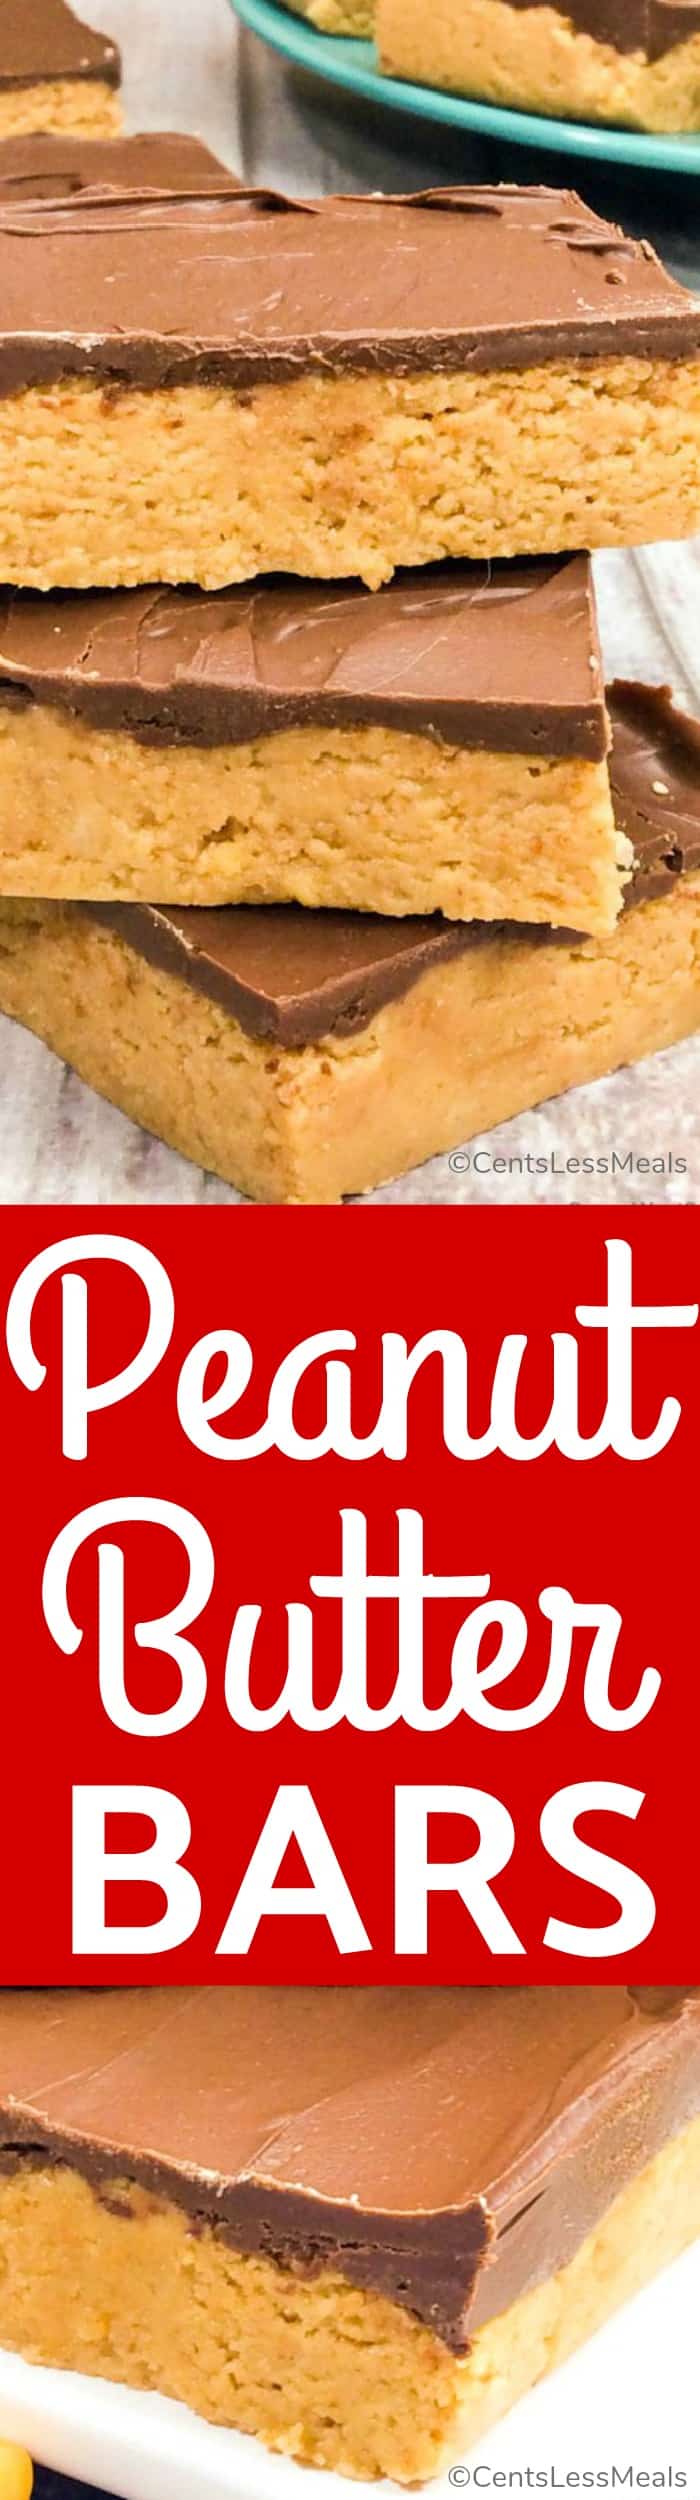 Peanut Butter Bars with a title